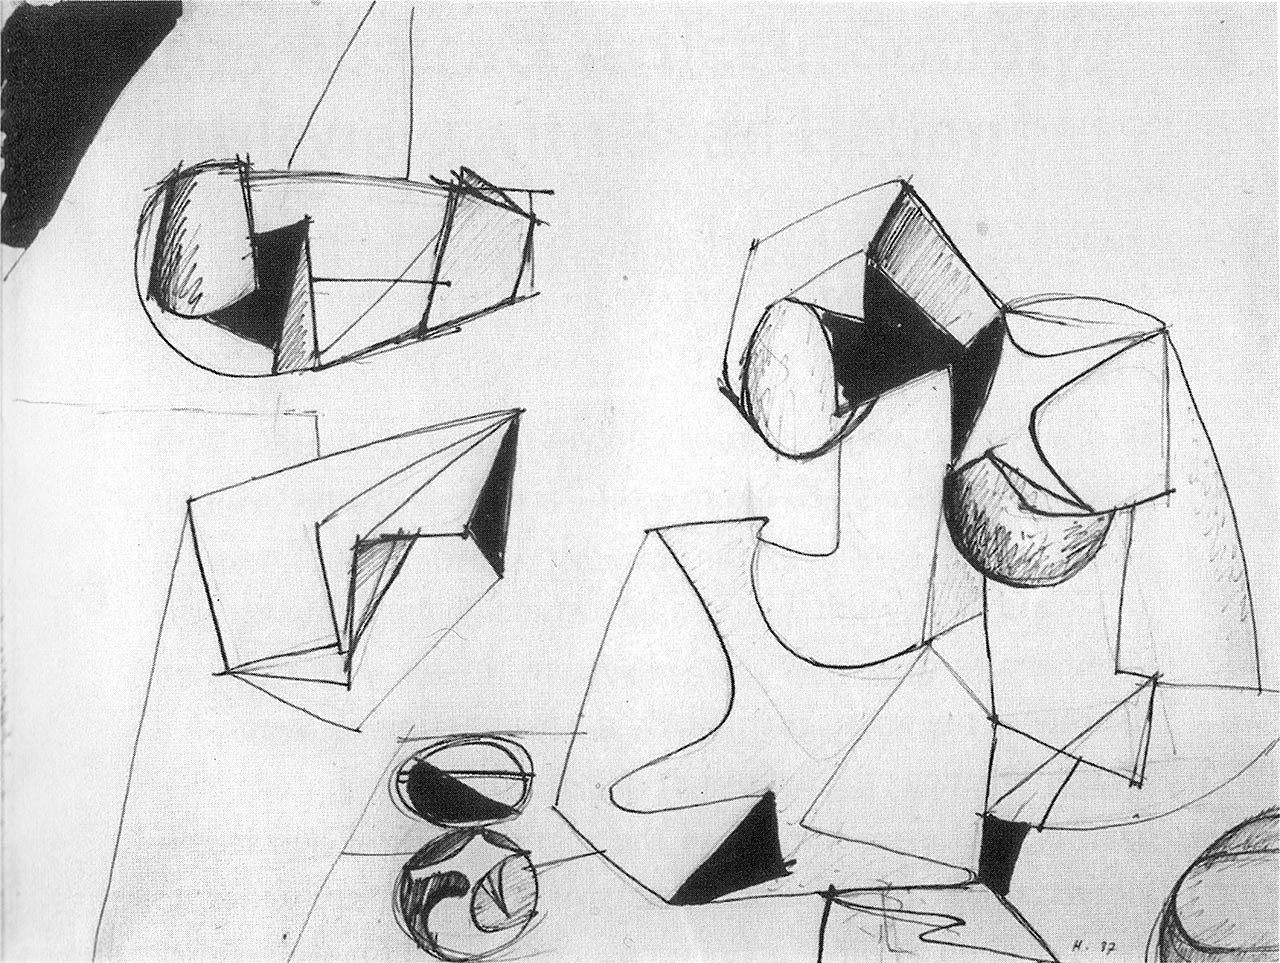 Jean Hélion, “Scattered Elements” (1937), ink on paper, 18 x 23 5/8 in (IMEC Archive), reproduced in black and white in 'Double Rhythm'